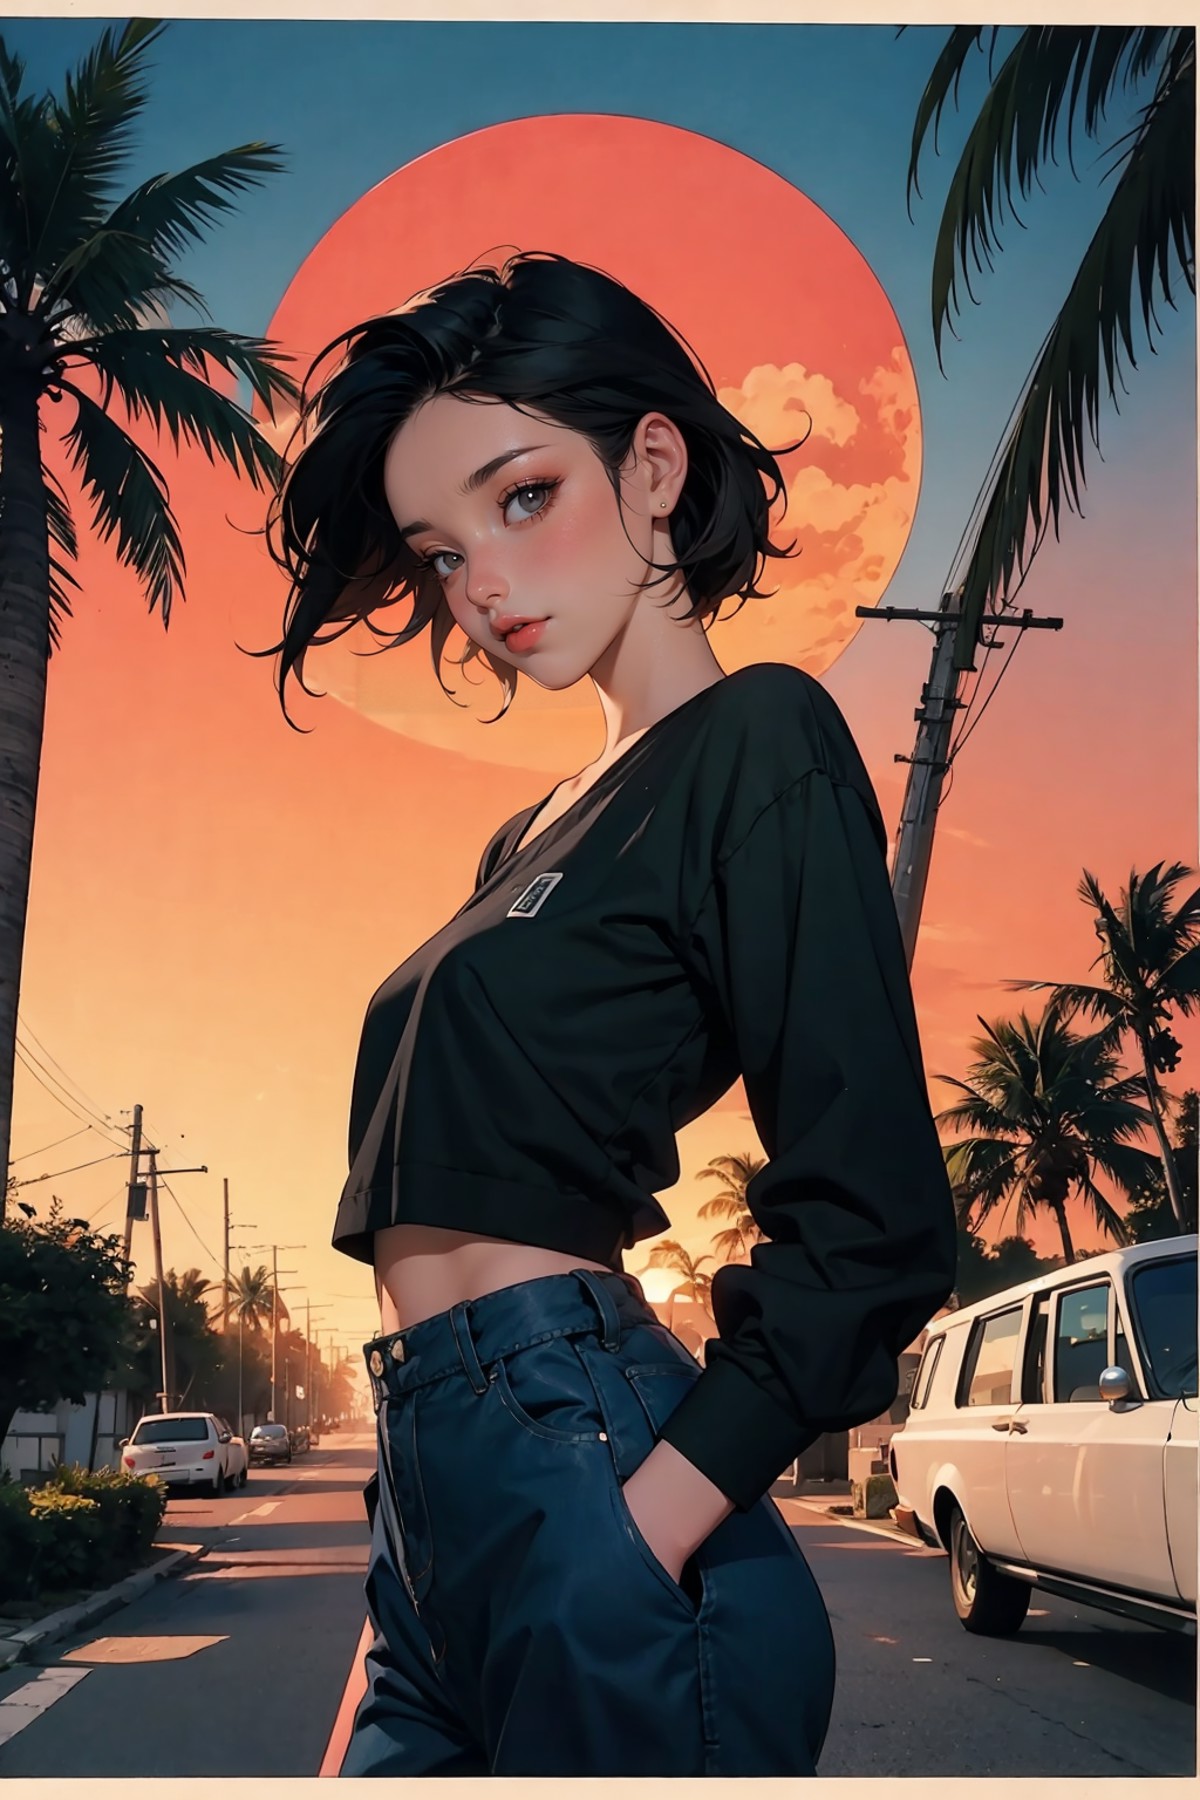 retro girl, Miami, sunset, Ferrari, palm tree, 90's, (flat colors, flat texture, lineart:1.2), graphical design, (heavy in...